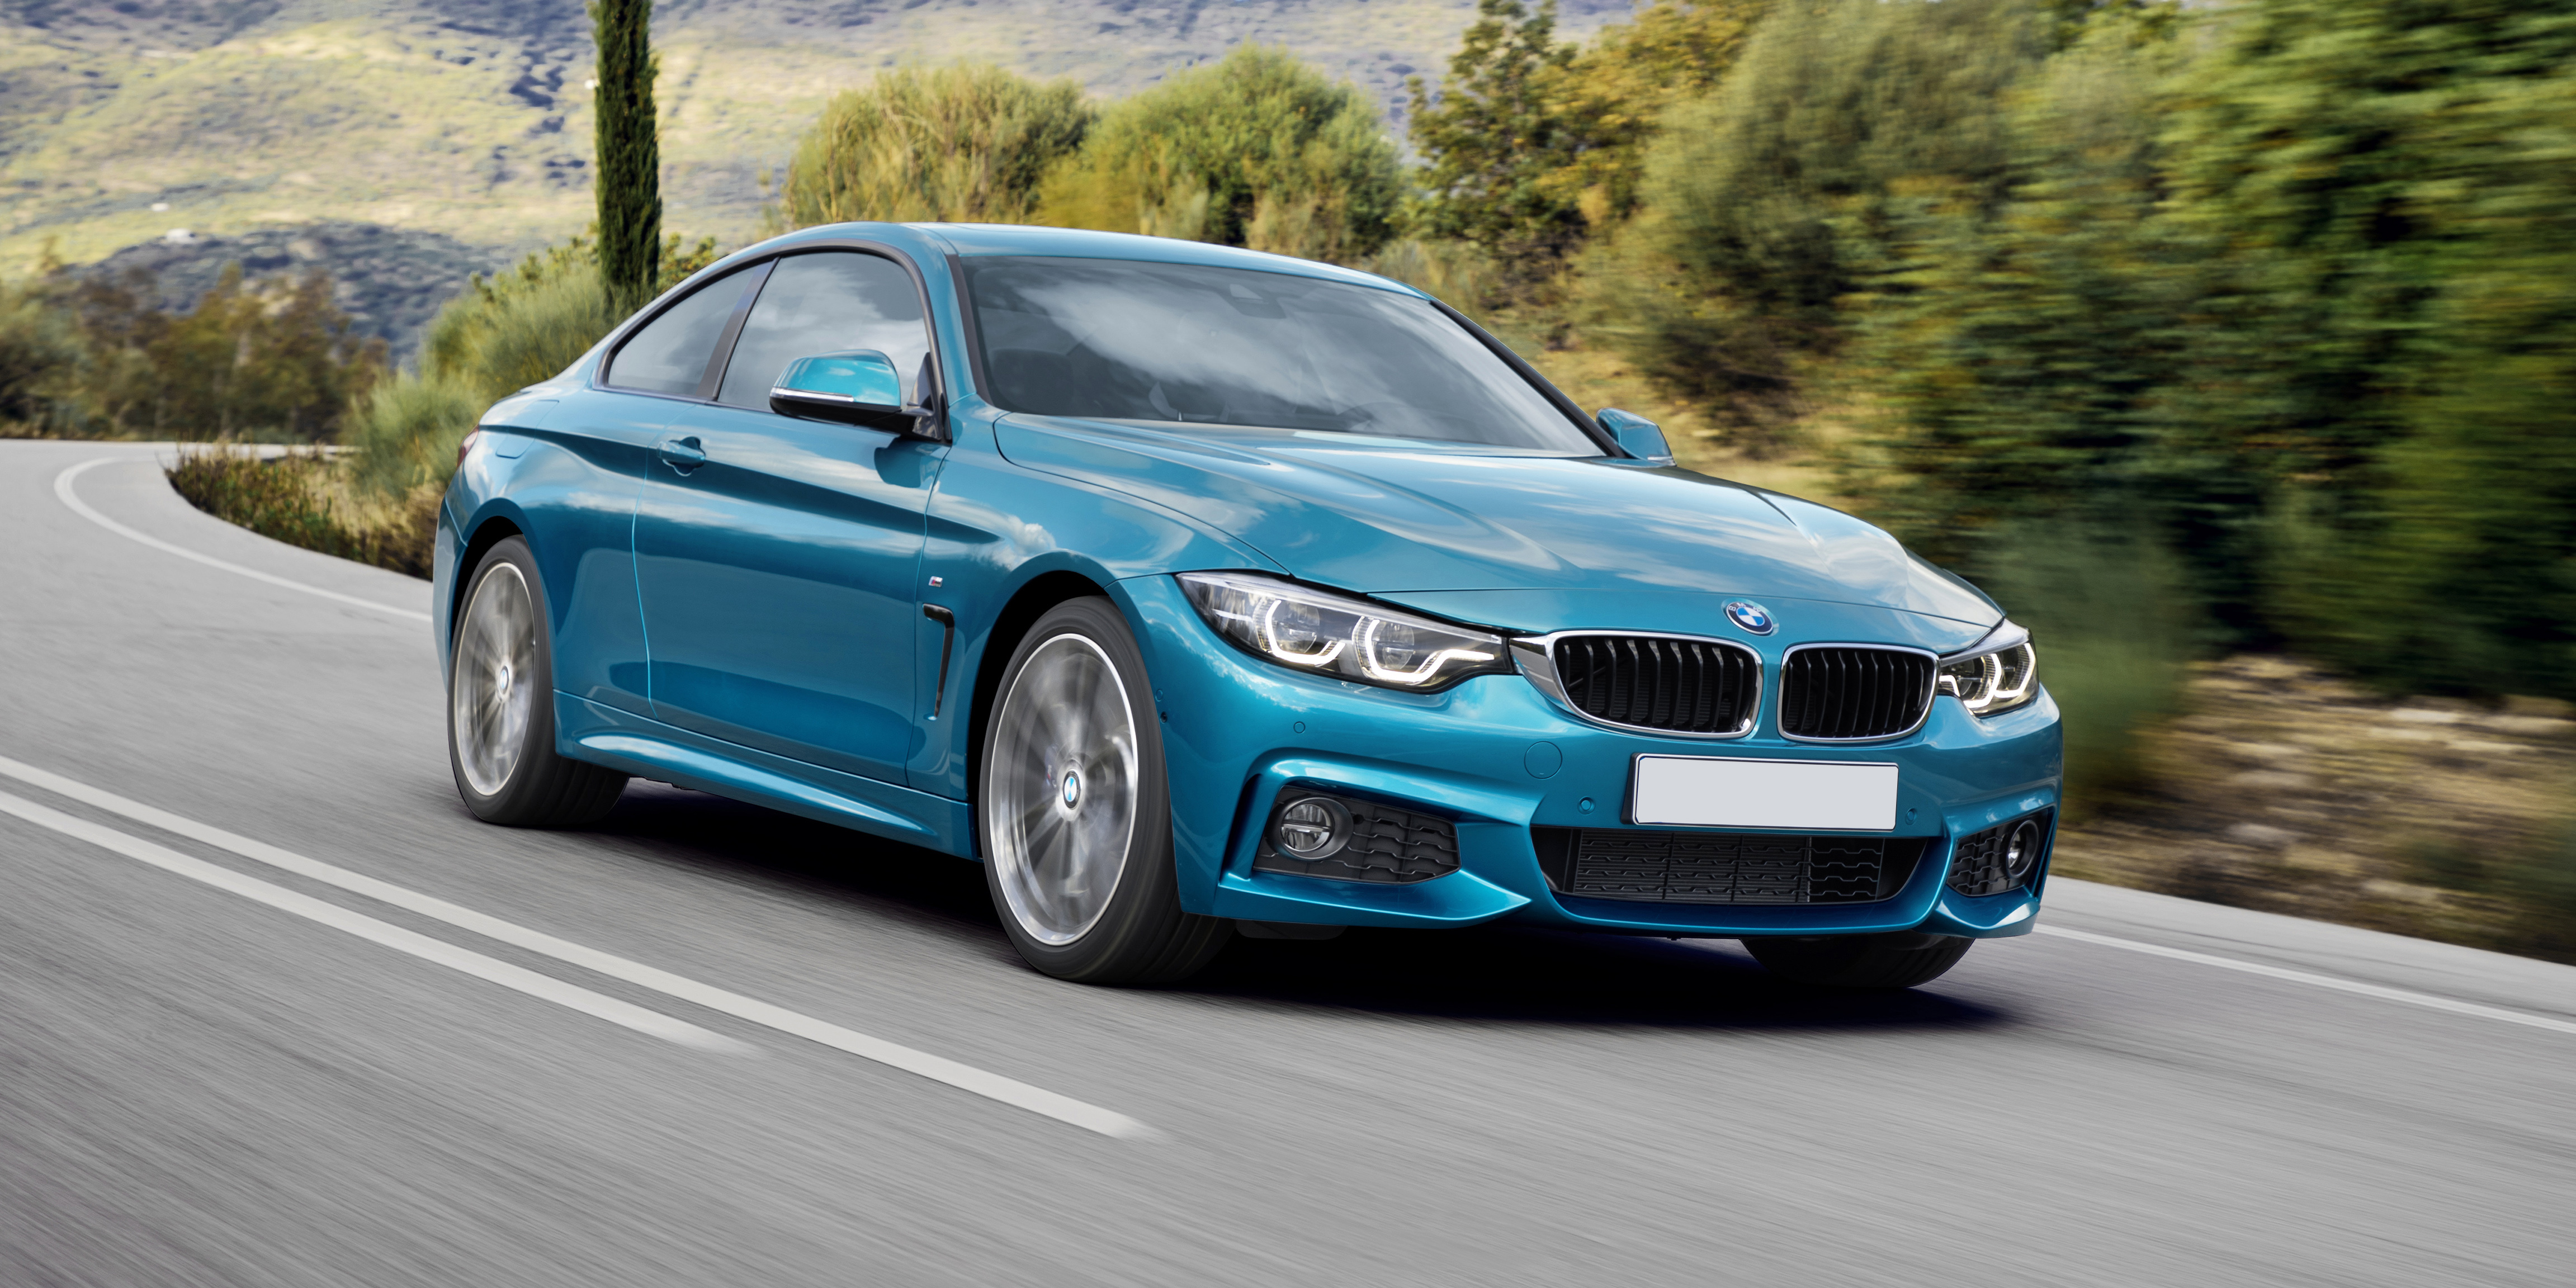 BMW 4 Series Coupe (G22) best big